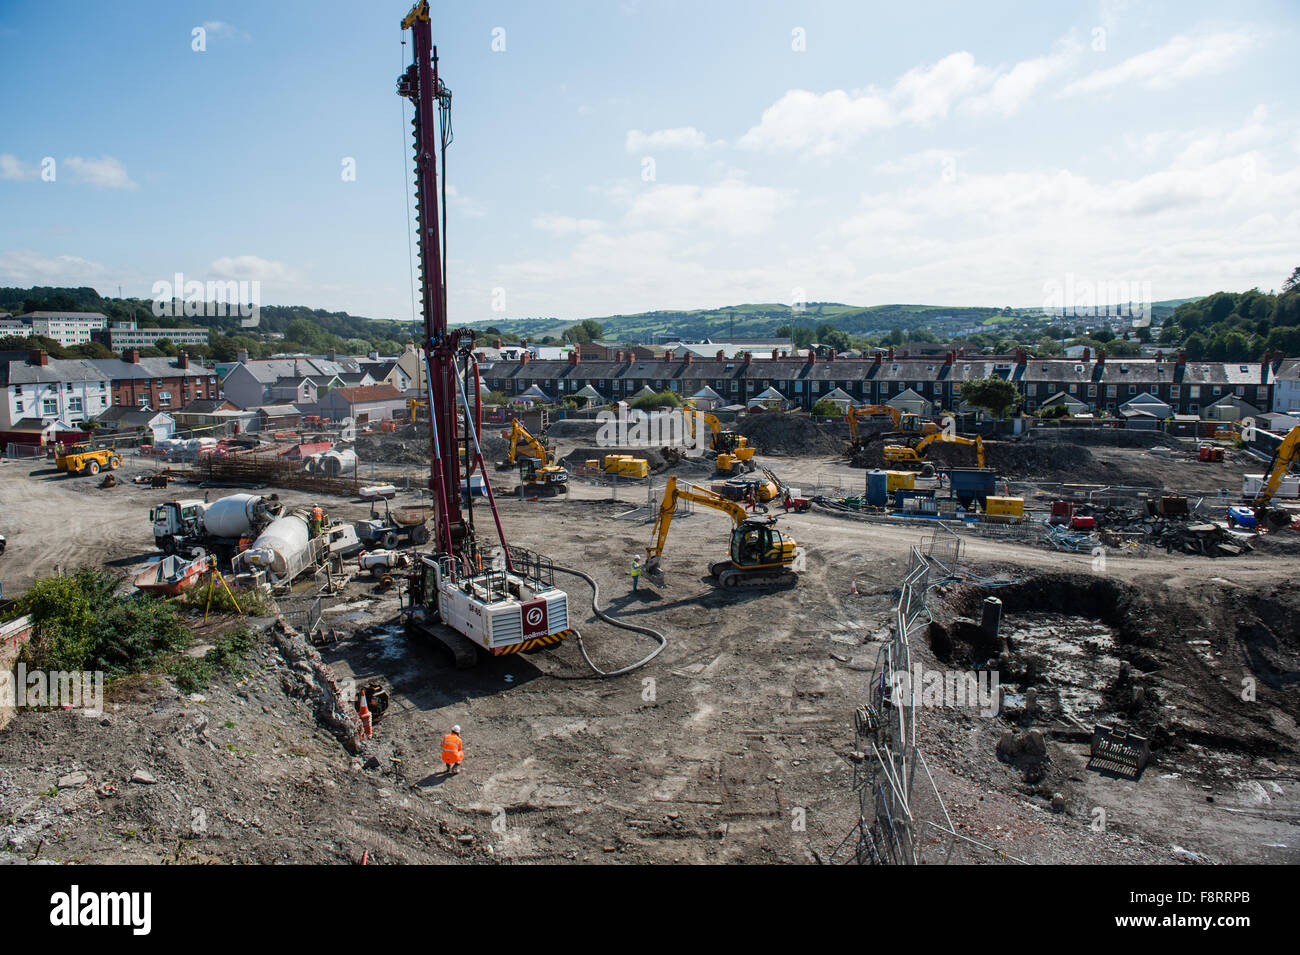 Urban Regeneration: Work prgressing to lay the foundations for a new branch of Marks and Spencers and a Tesco supermarket , on the brownfield former council yard site, Mill Street, Aberystwyth Wales UK, September 2015 Stock Photo